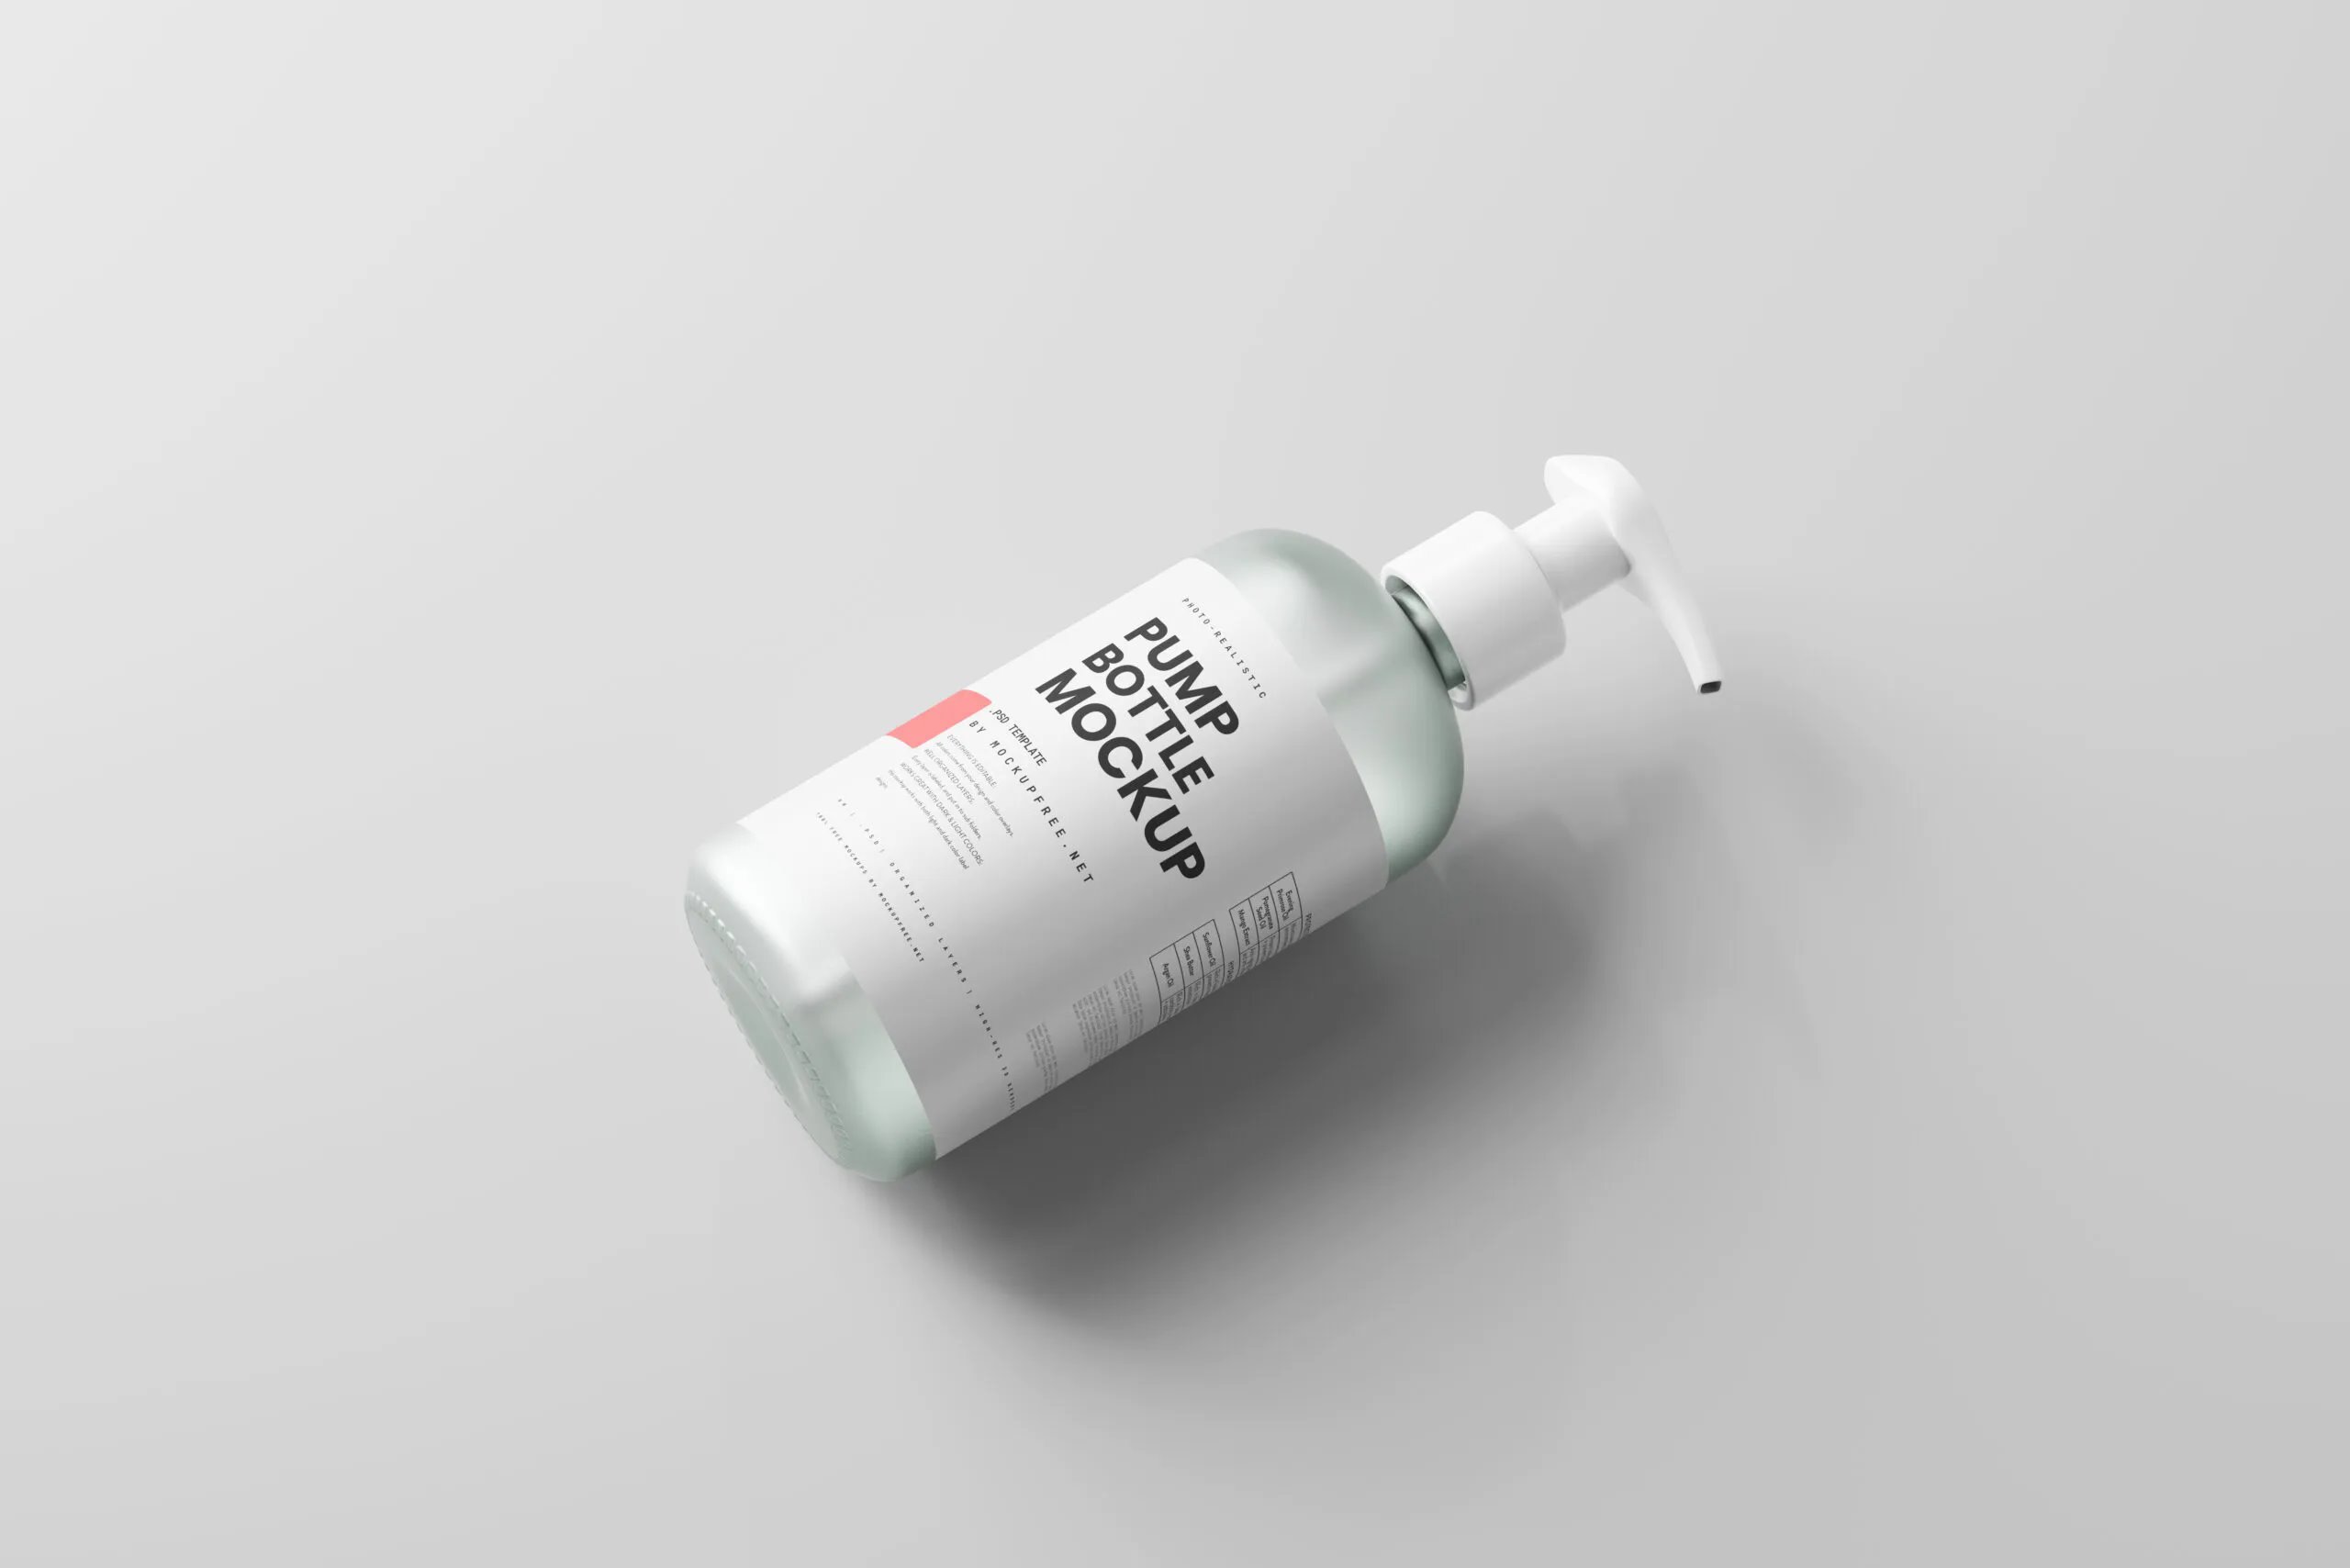 5 Frosted Glass Pump Bottle Mockups in Varied Sights FREE PSD